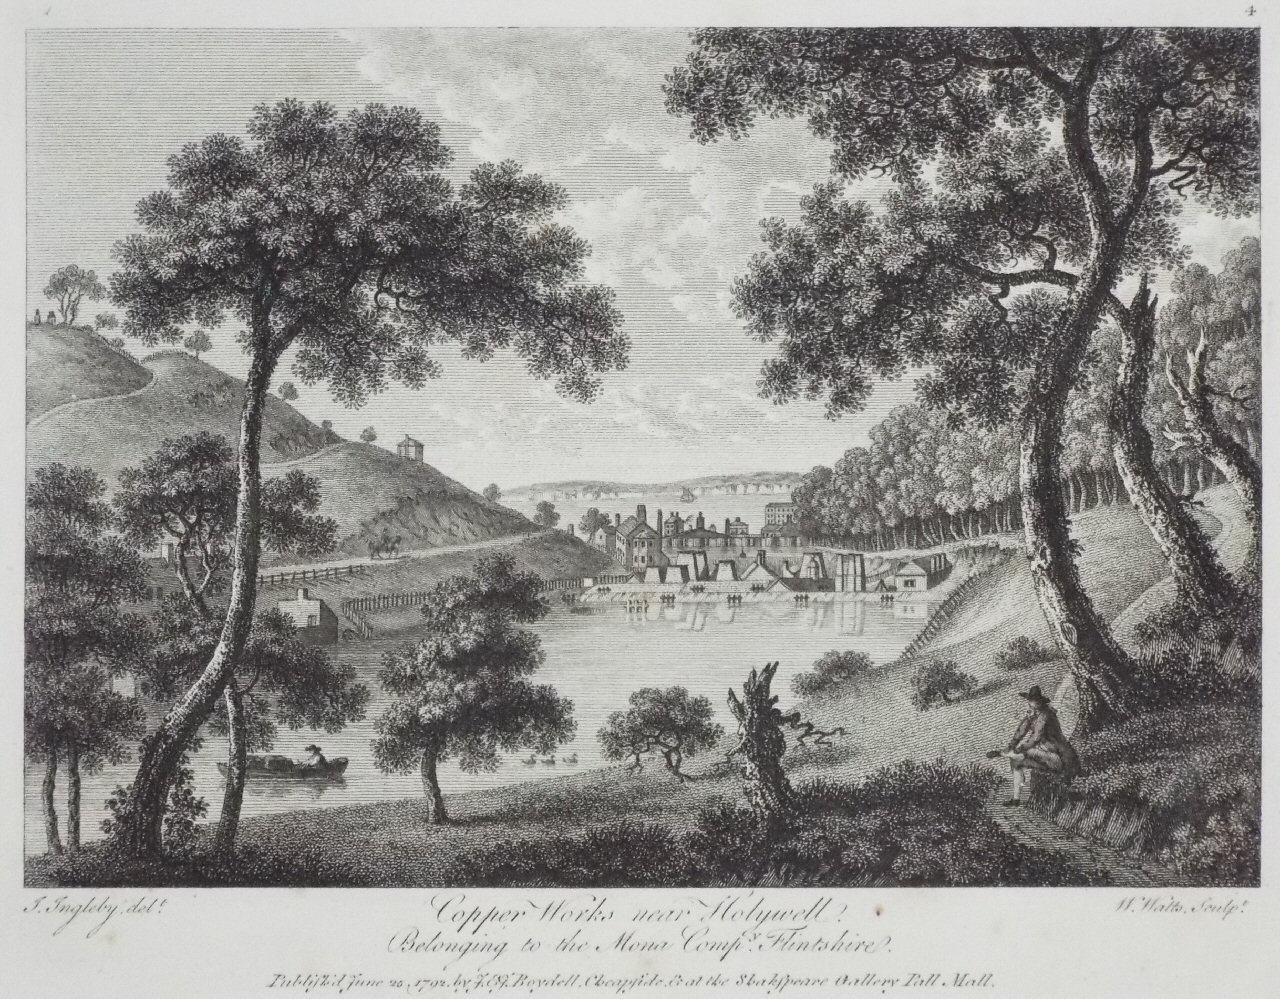 Print - Copper Works near Holywell. Belonging to the Mona Compy. Flintshire. - Watts